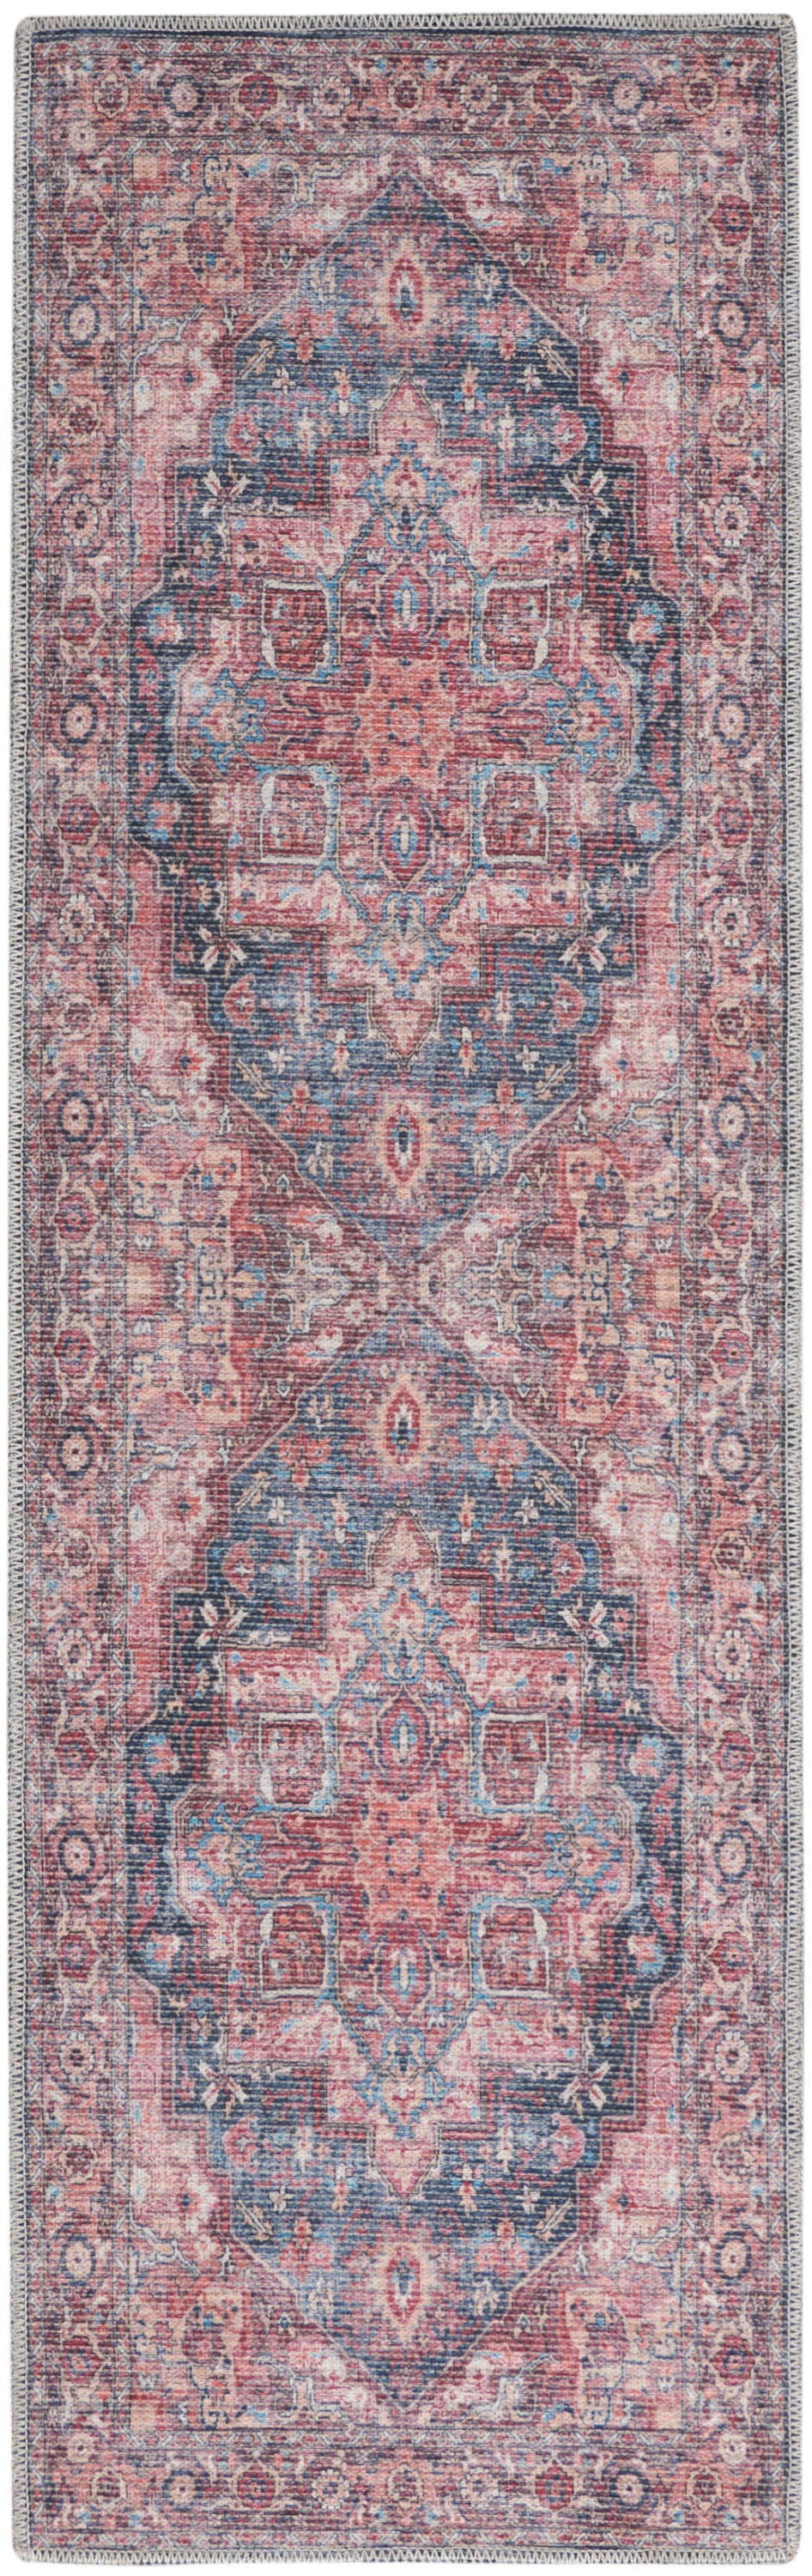 Nicole Curtis Machine Washable Series 1 SR101 Multicolor  Traditional Machinemade Rug